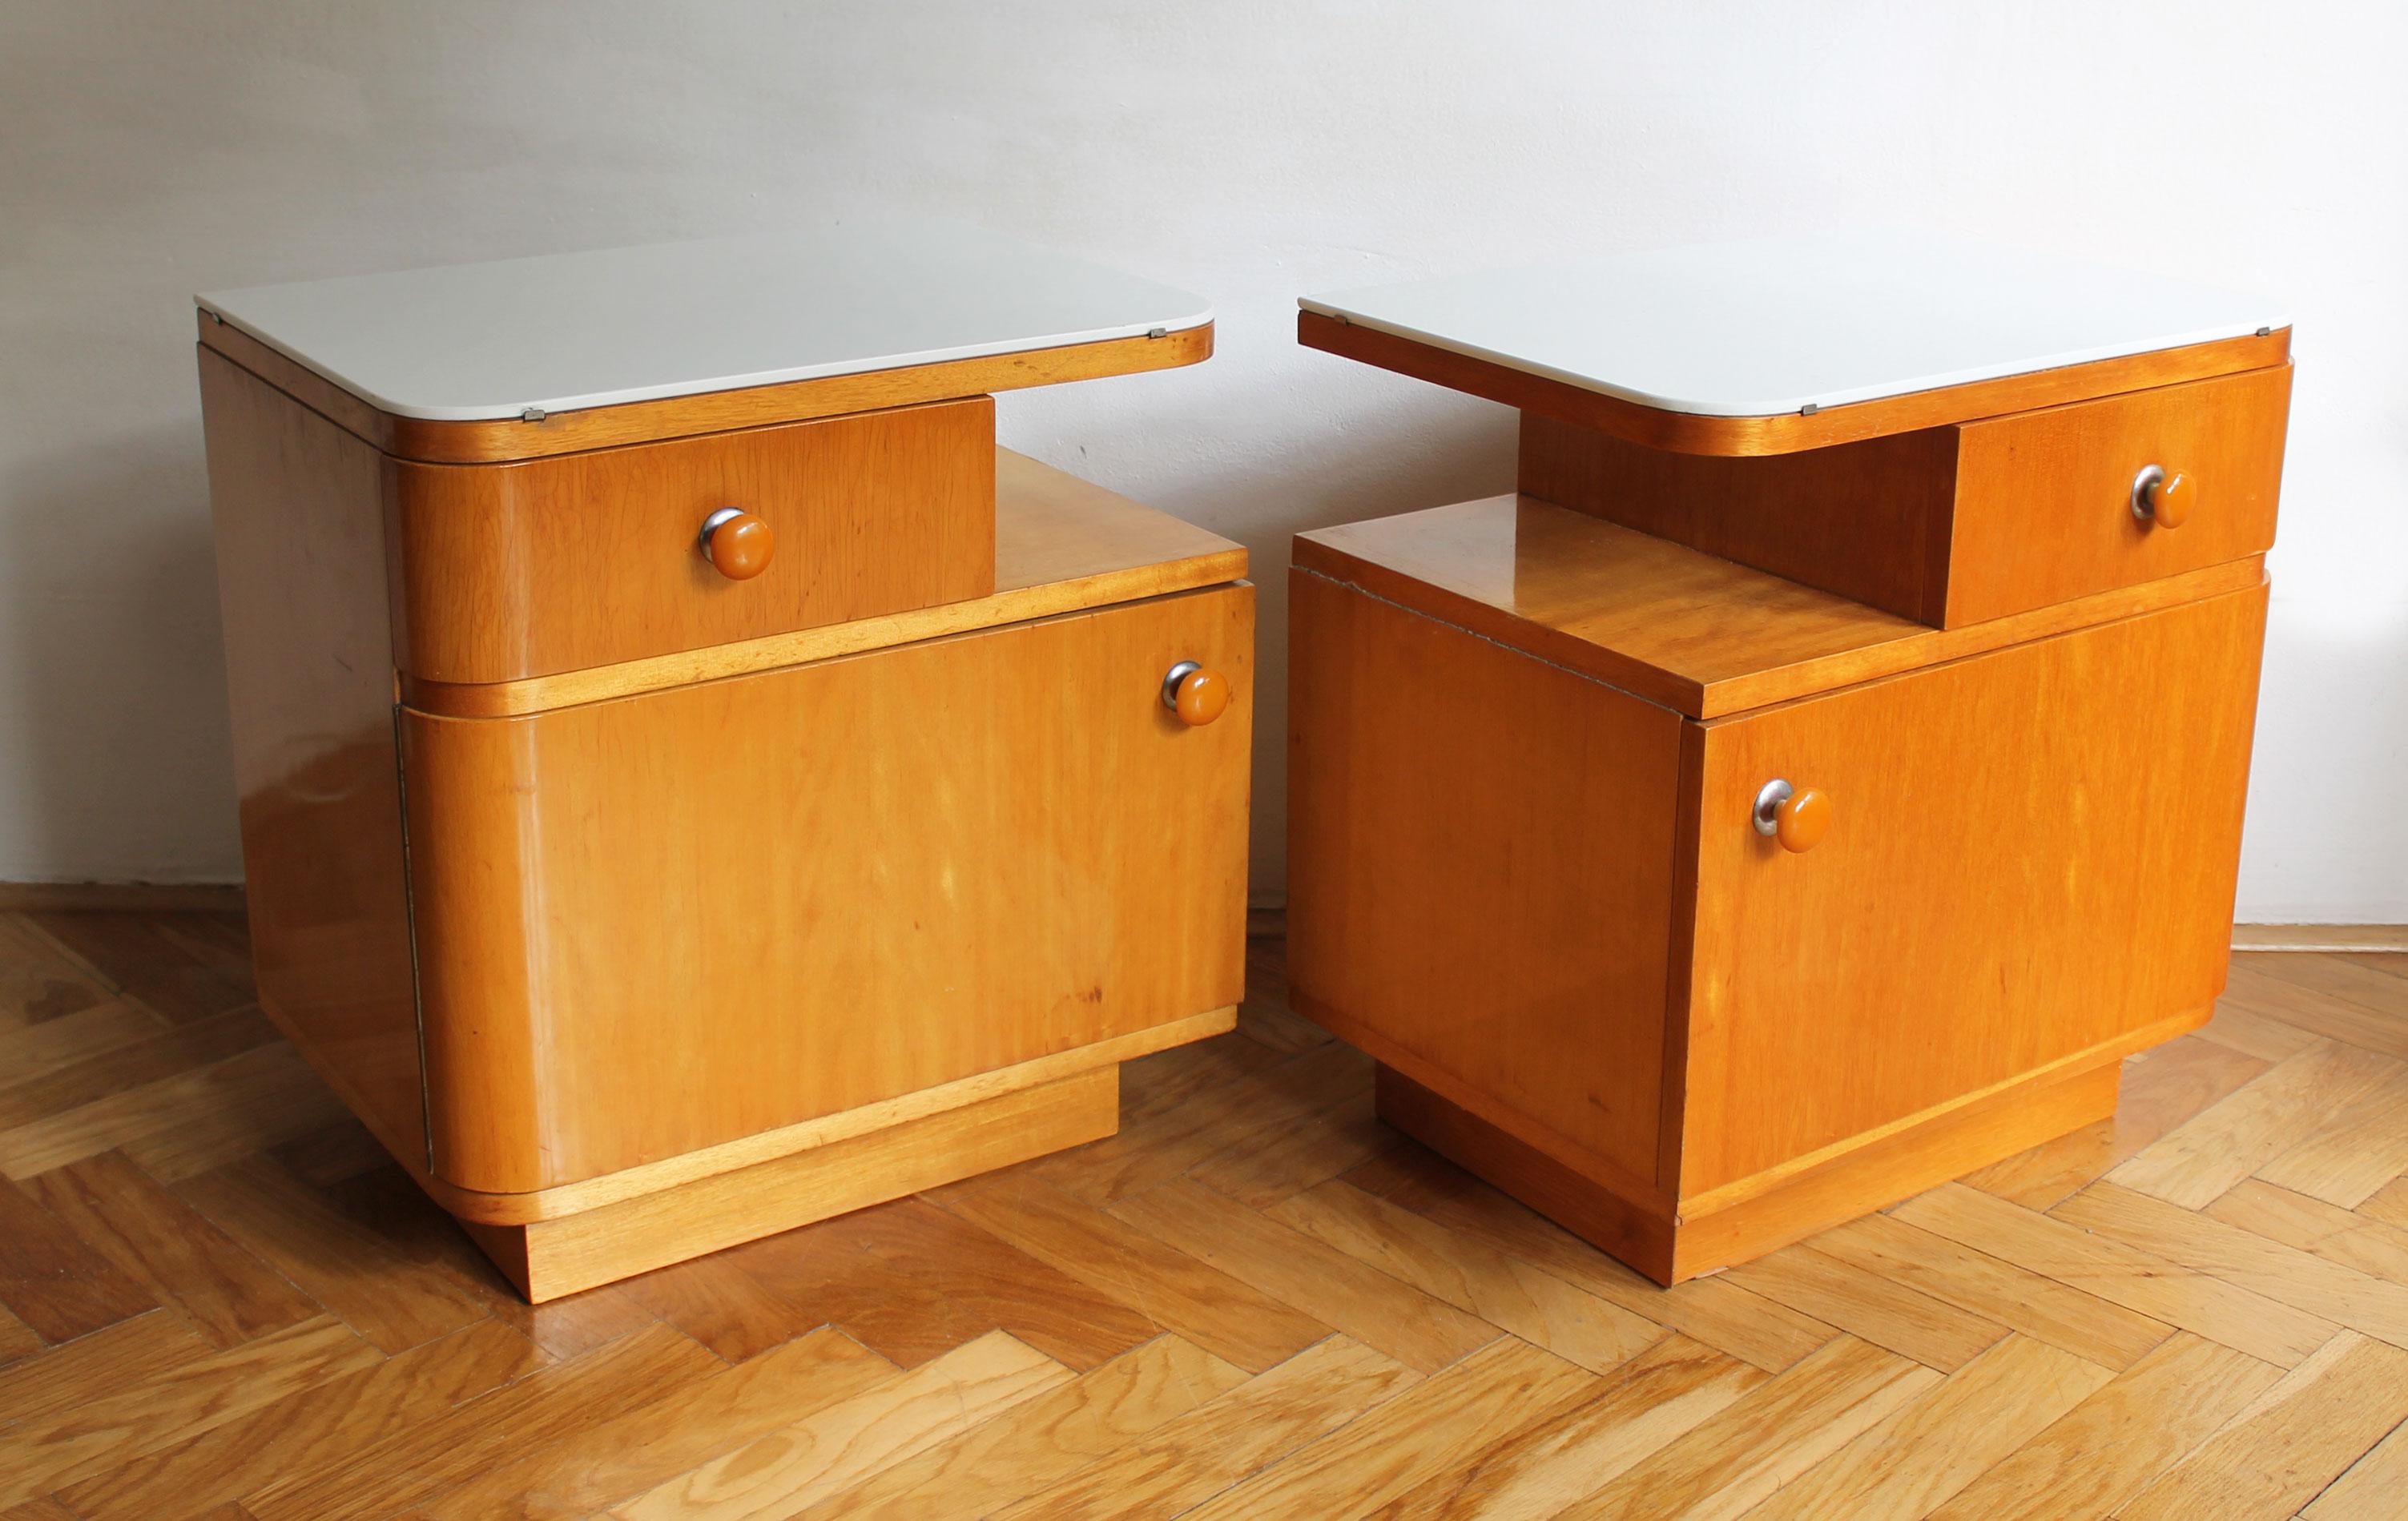 A pair of 1950’s Bedside tables made of maple wood and elegant white opaxite glass.

The bedside tables have softly curved corners on one side with a well balanced composition consisting of a large door with a smaller drawer, both with round orange